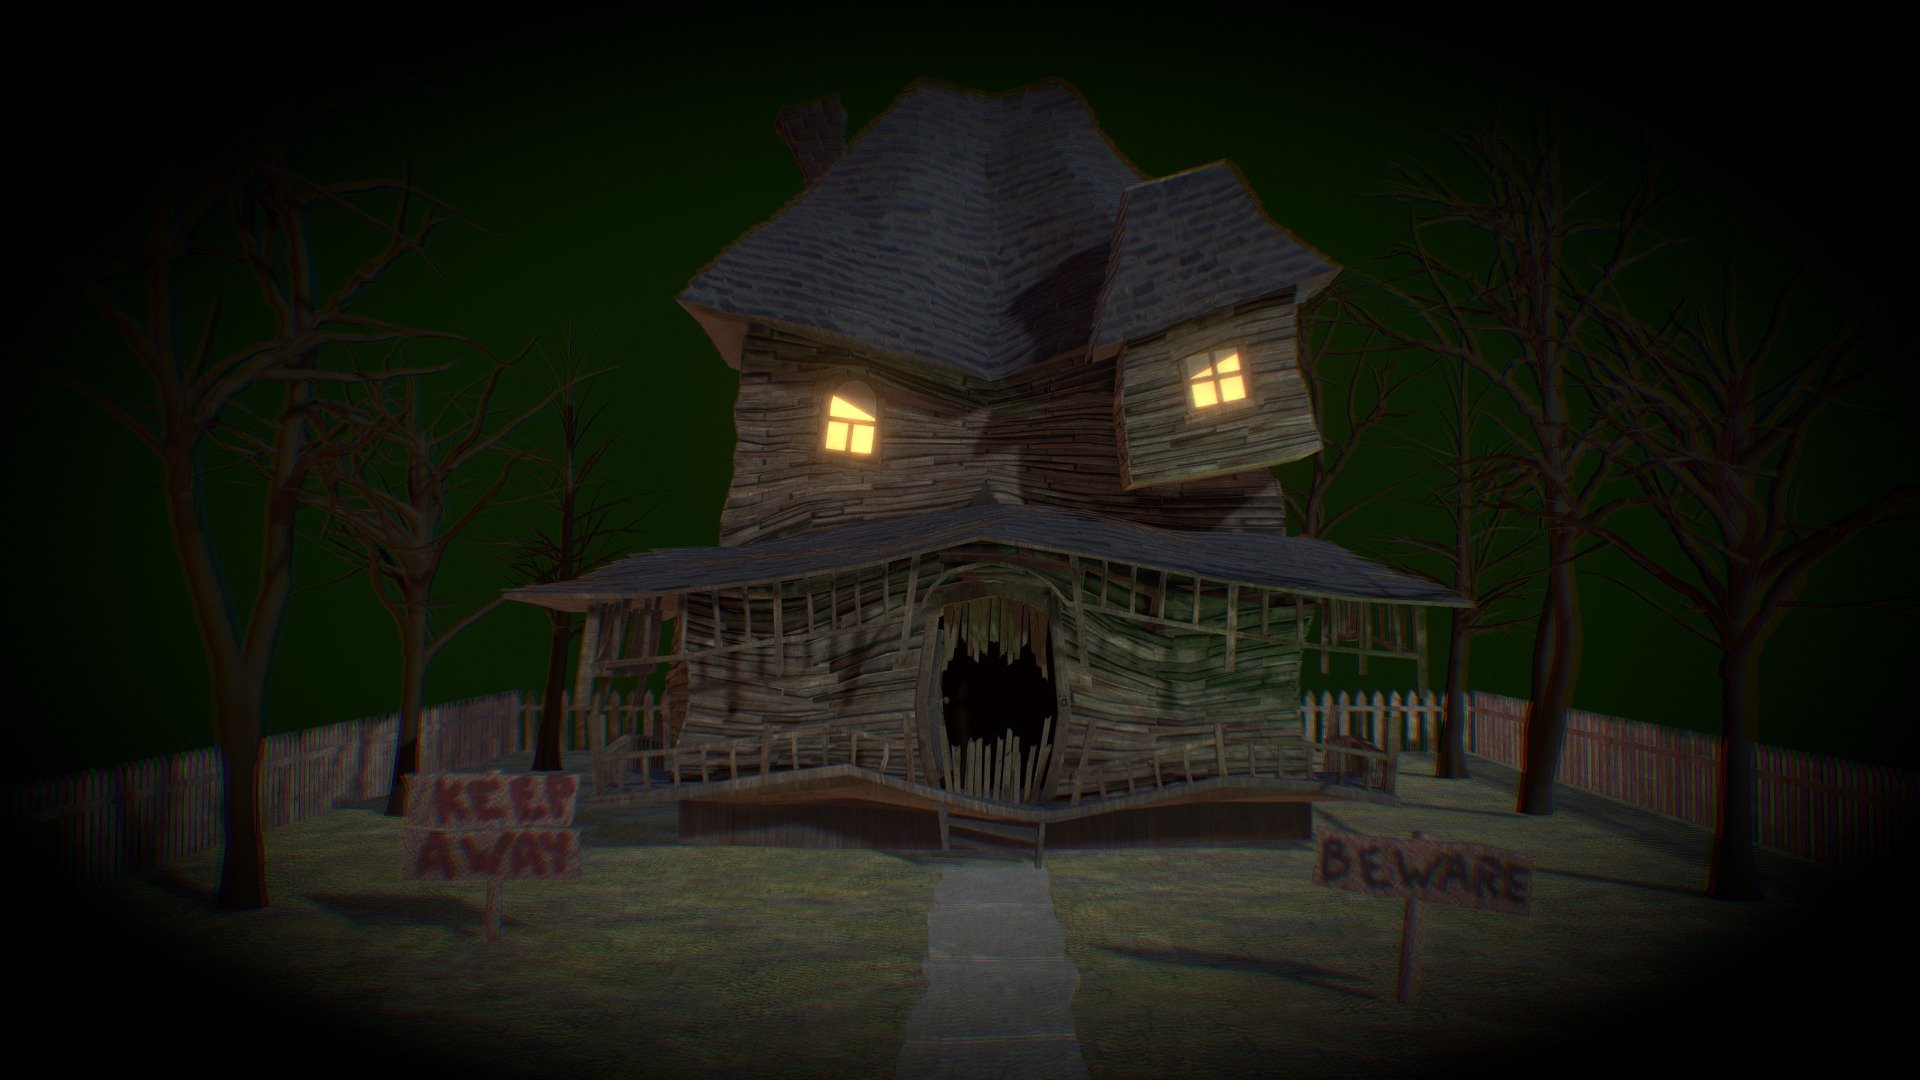 My entry for the haunted house challenge.
I always loved this movie, &ldquo;Monster House